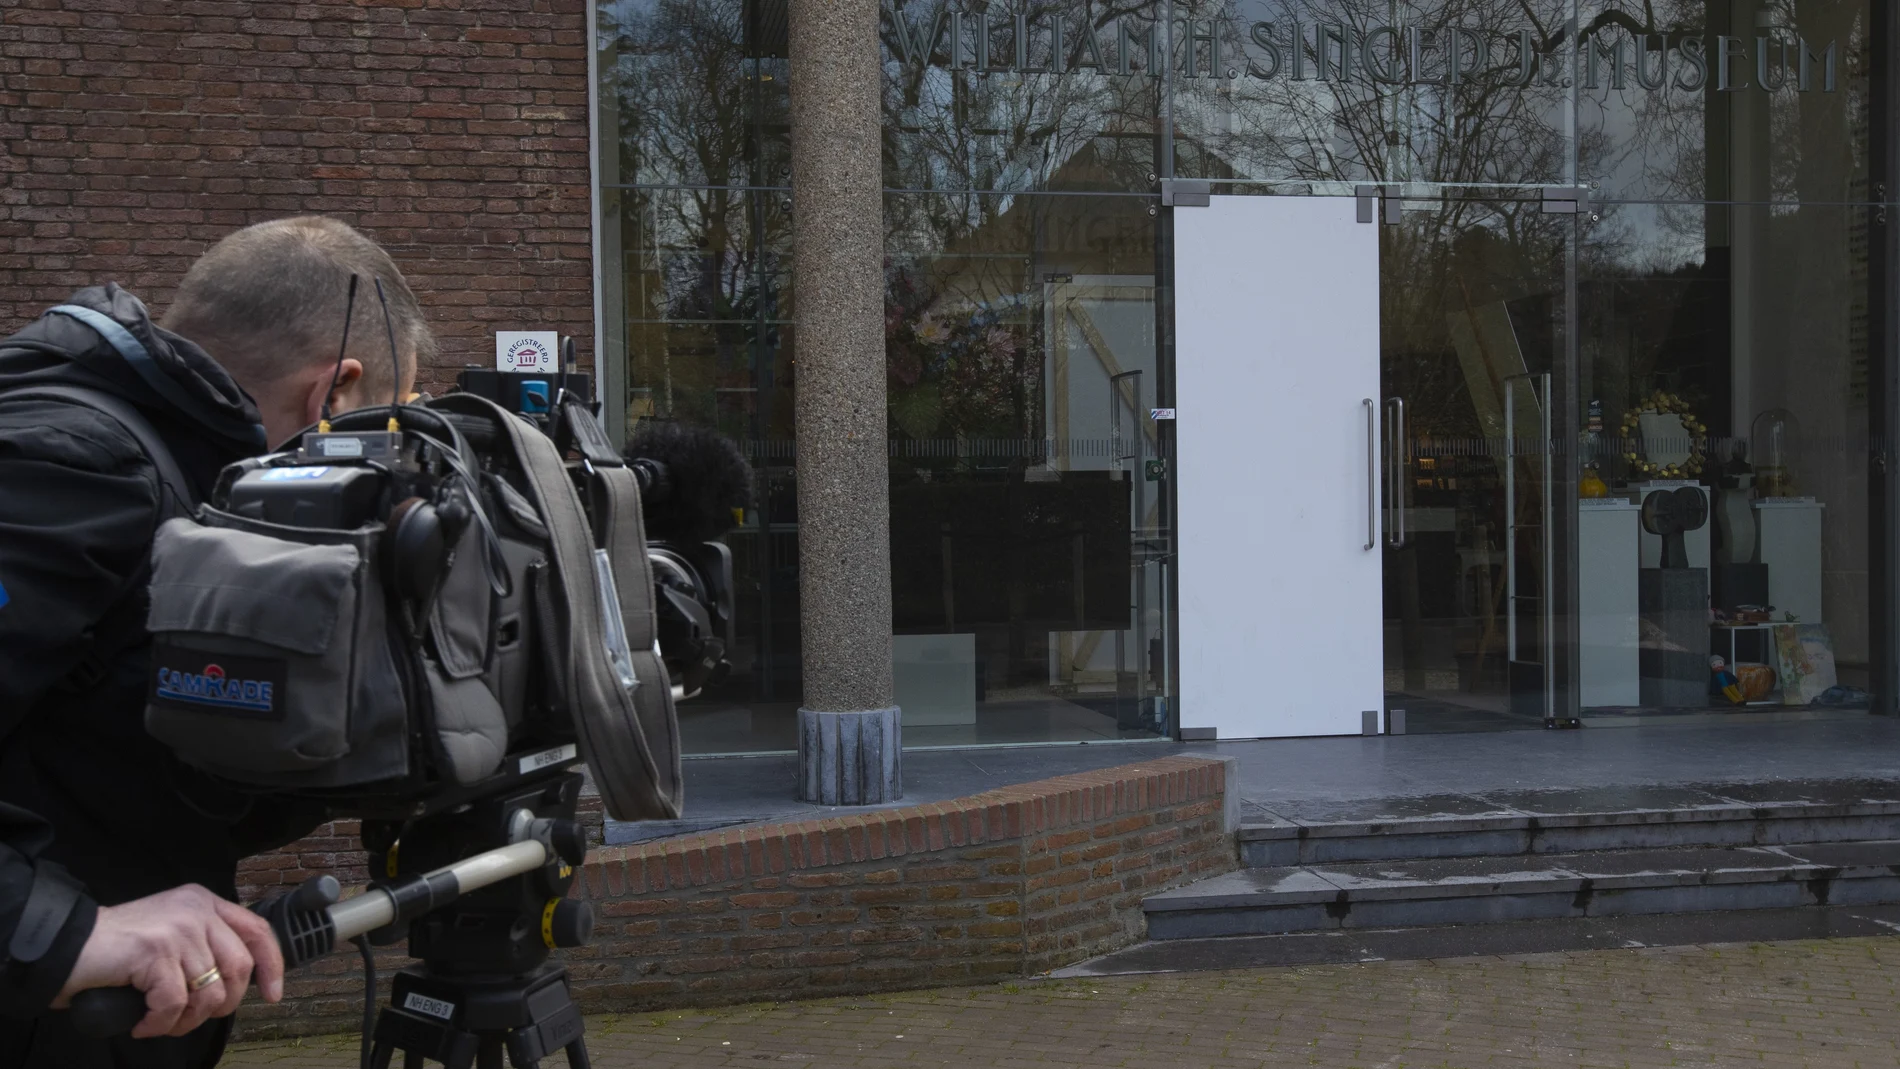 A cameraman films the glass door which was smashed during a break-in at the Singer Museum in Laren, Netherlands, Monday March 30, 2020. Police are investigating a break-in at a Dutch art museum that is currently closed because of restrictions aimed at slowing the spread of the coronavirus, the museum and police said Monday. (AP Photo/Peter Dejong)